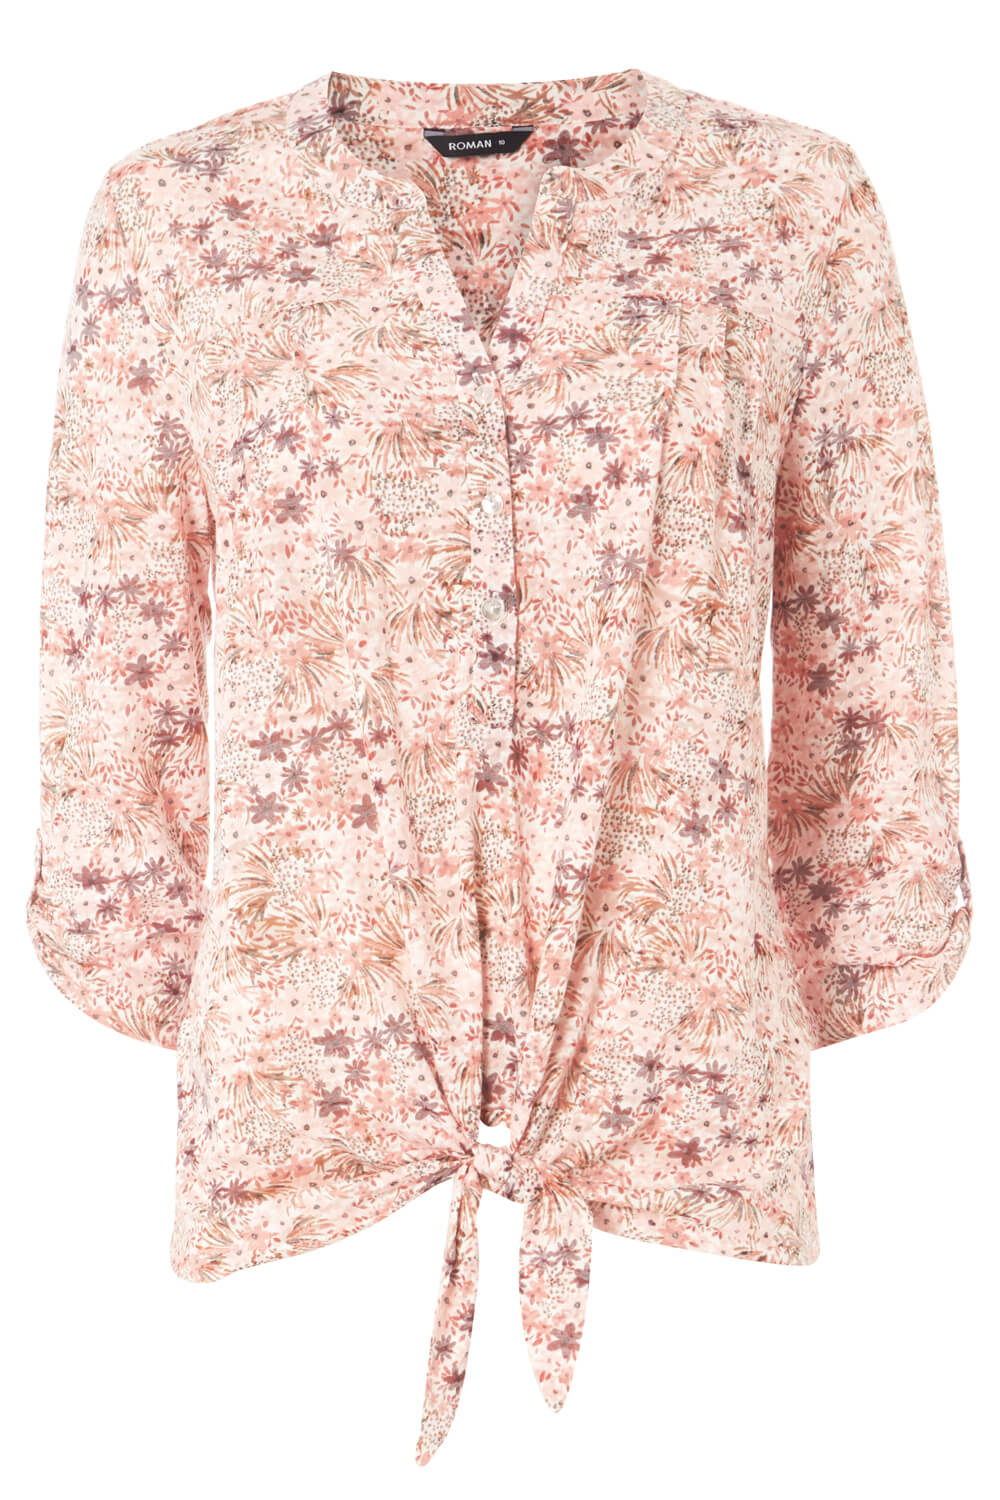 Light Pink Ditsy Floral Print Tie Front Top, Image 4 of 8